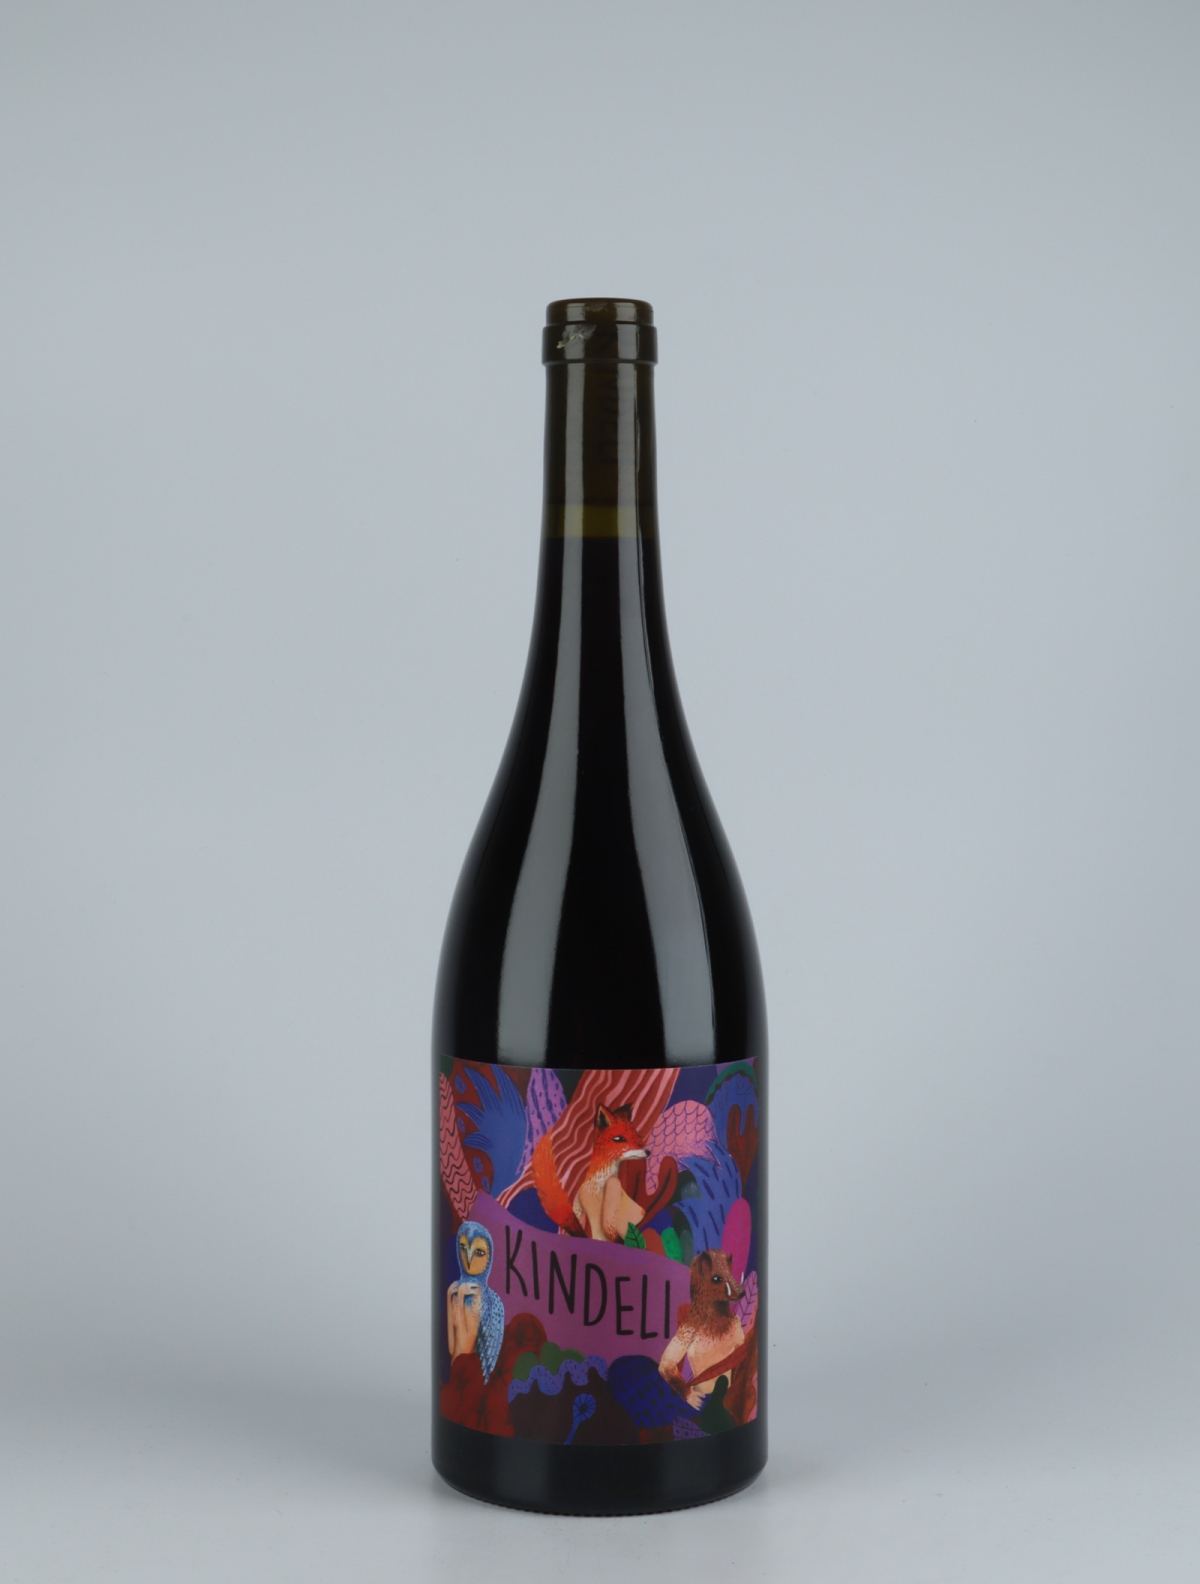 A bottle 2020 Tinto Red wine from Kindeli, Nelson in New Zealand